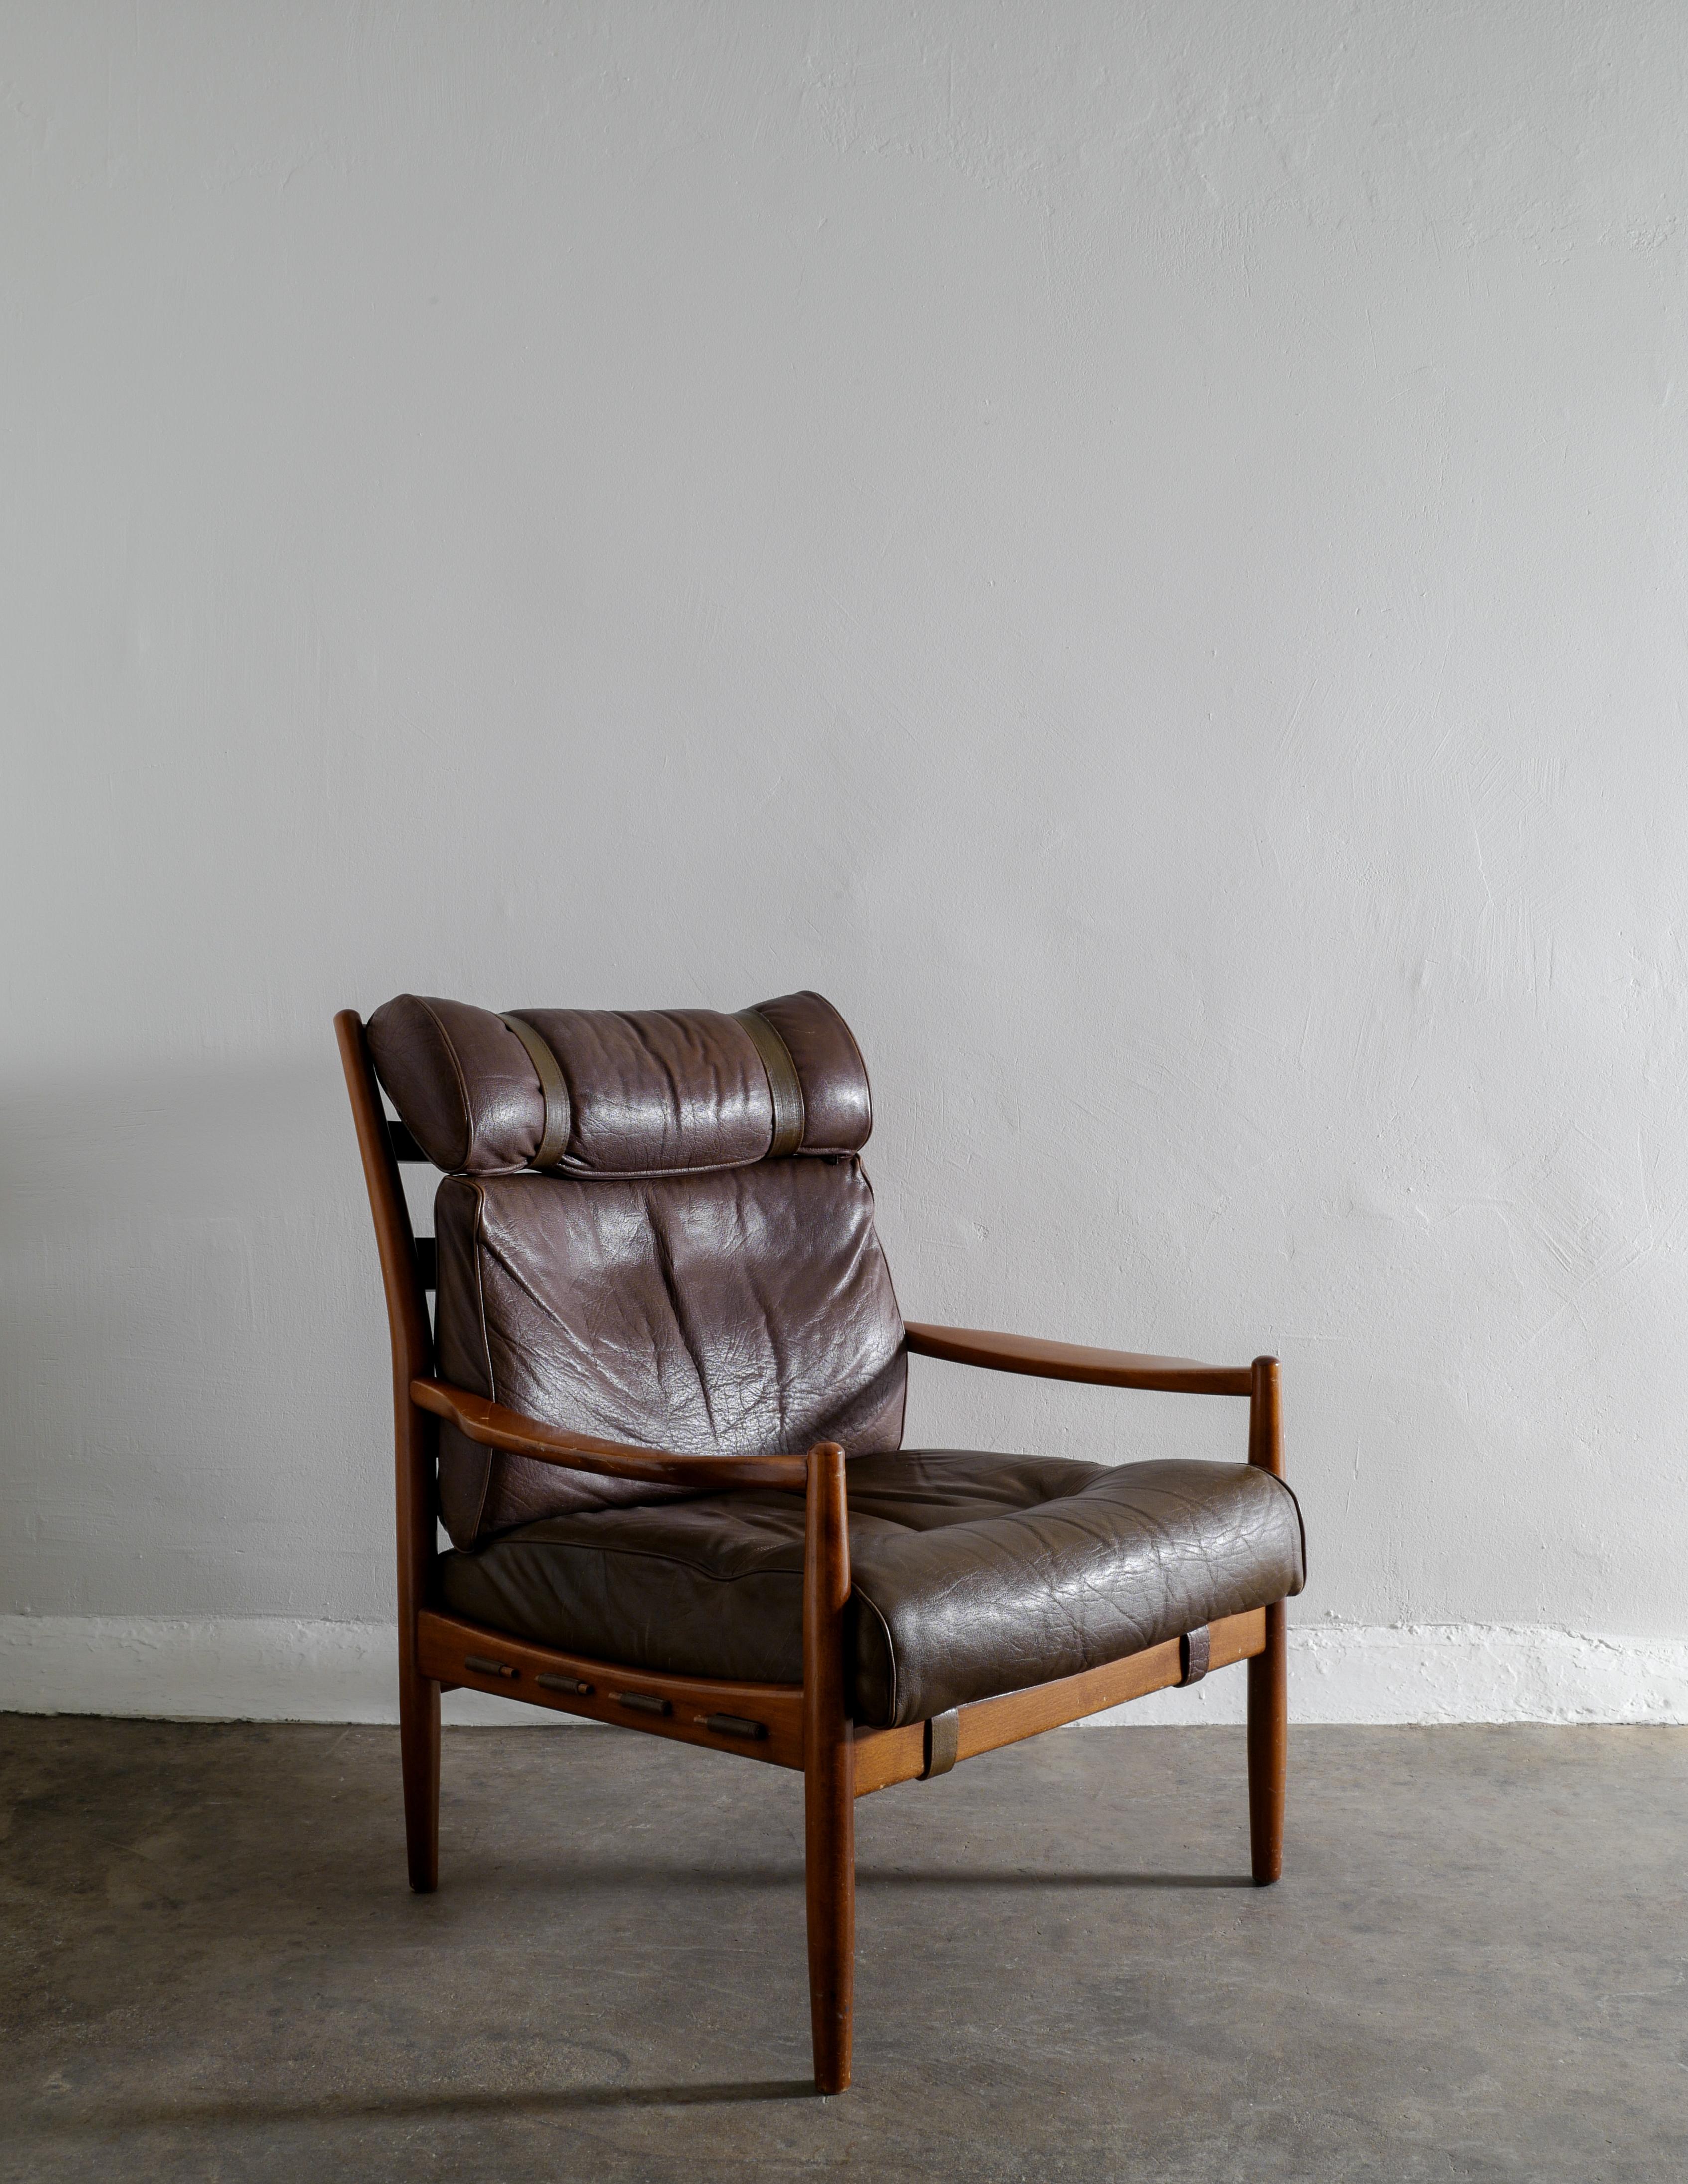 Rare armchair in dark brown buffalo leather and walnut designed by Ingemar Thillmark in the 1960s and produced by 